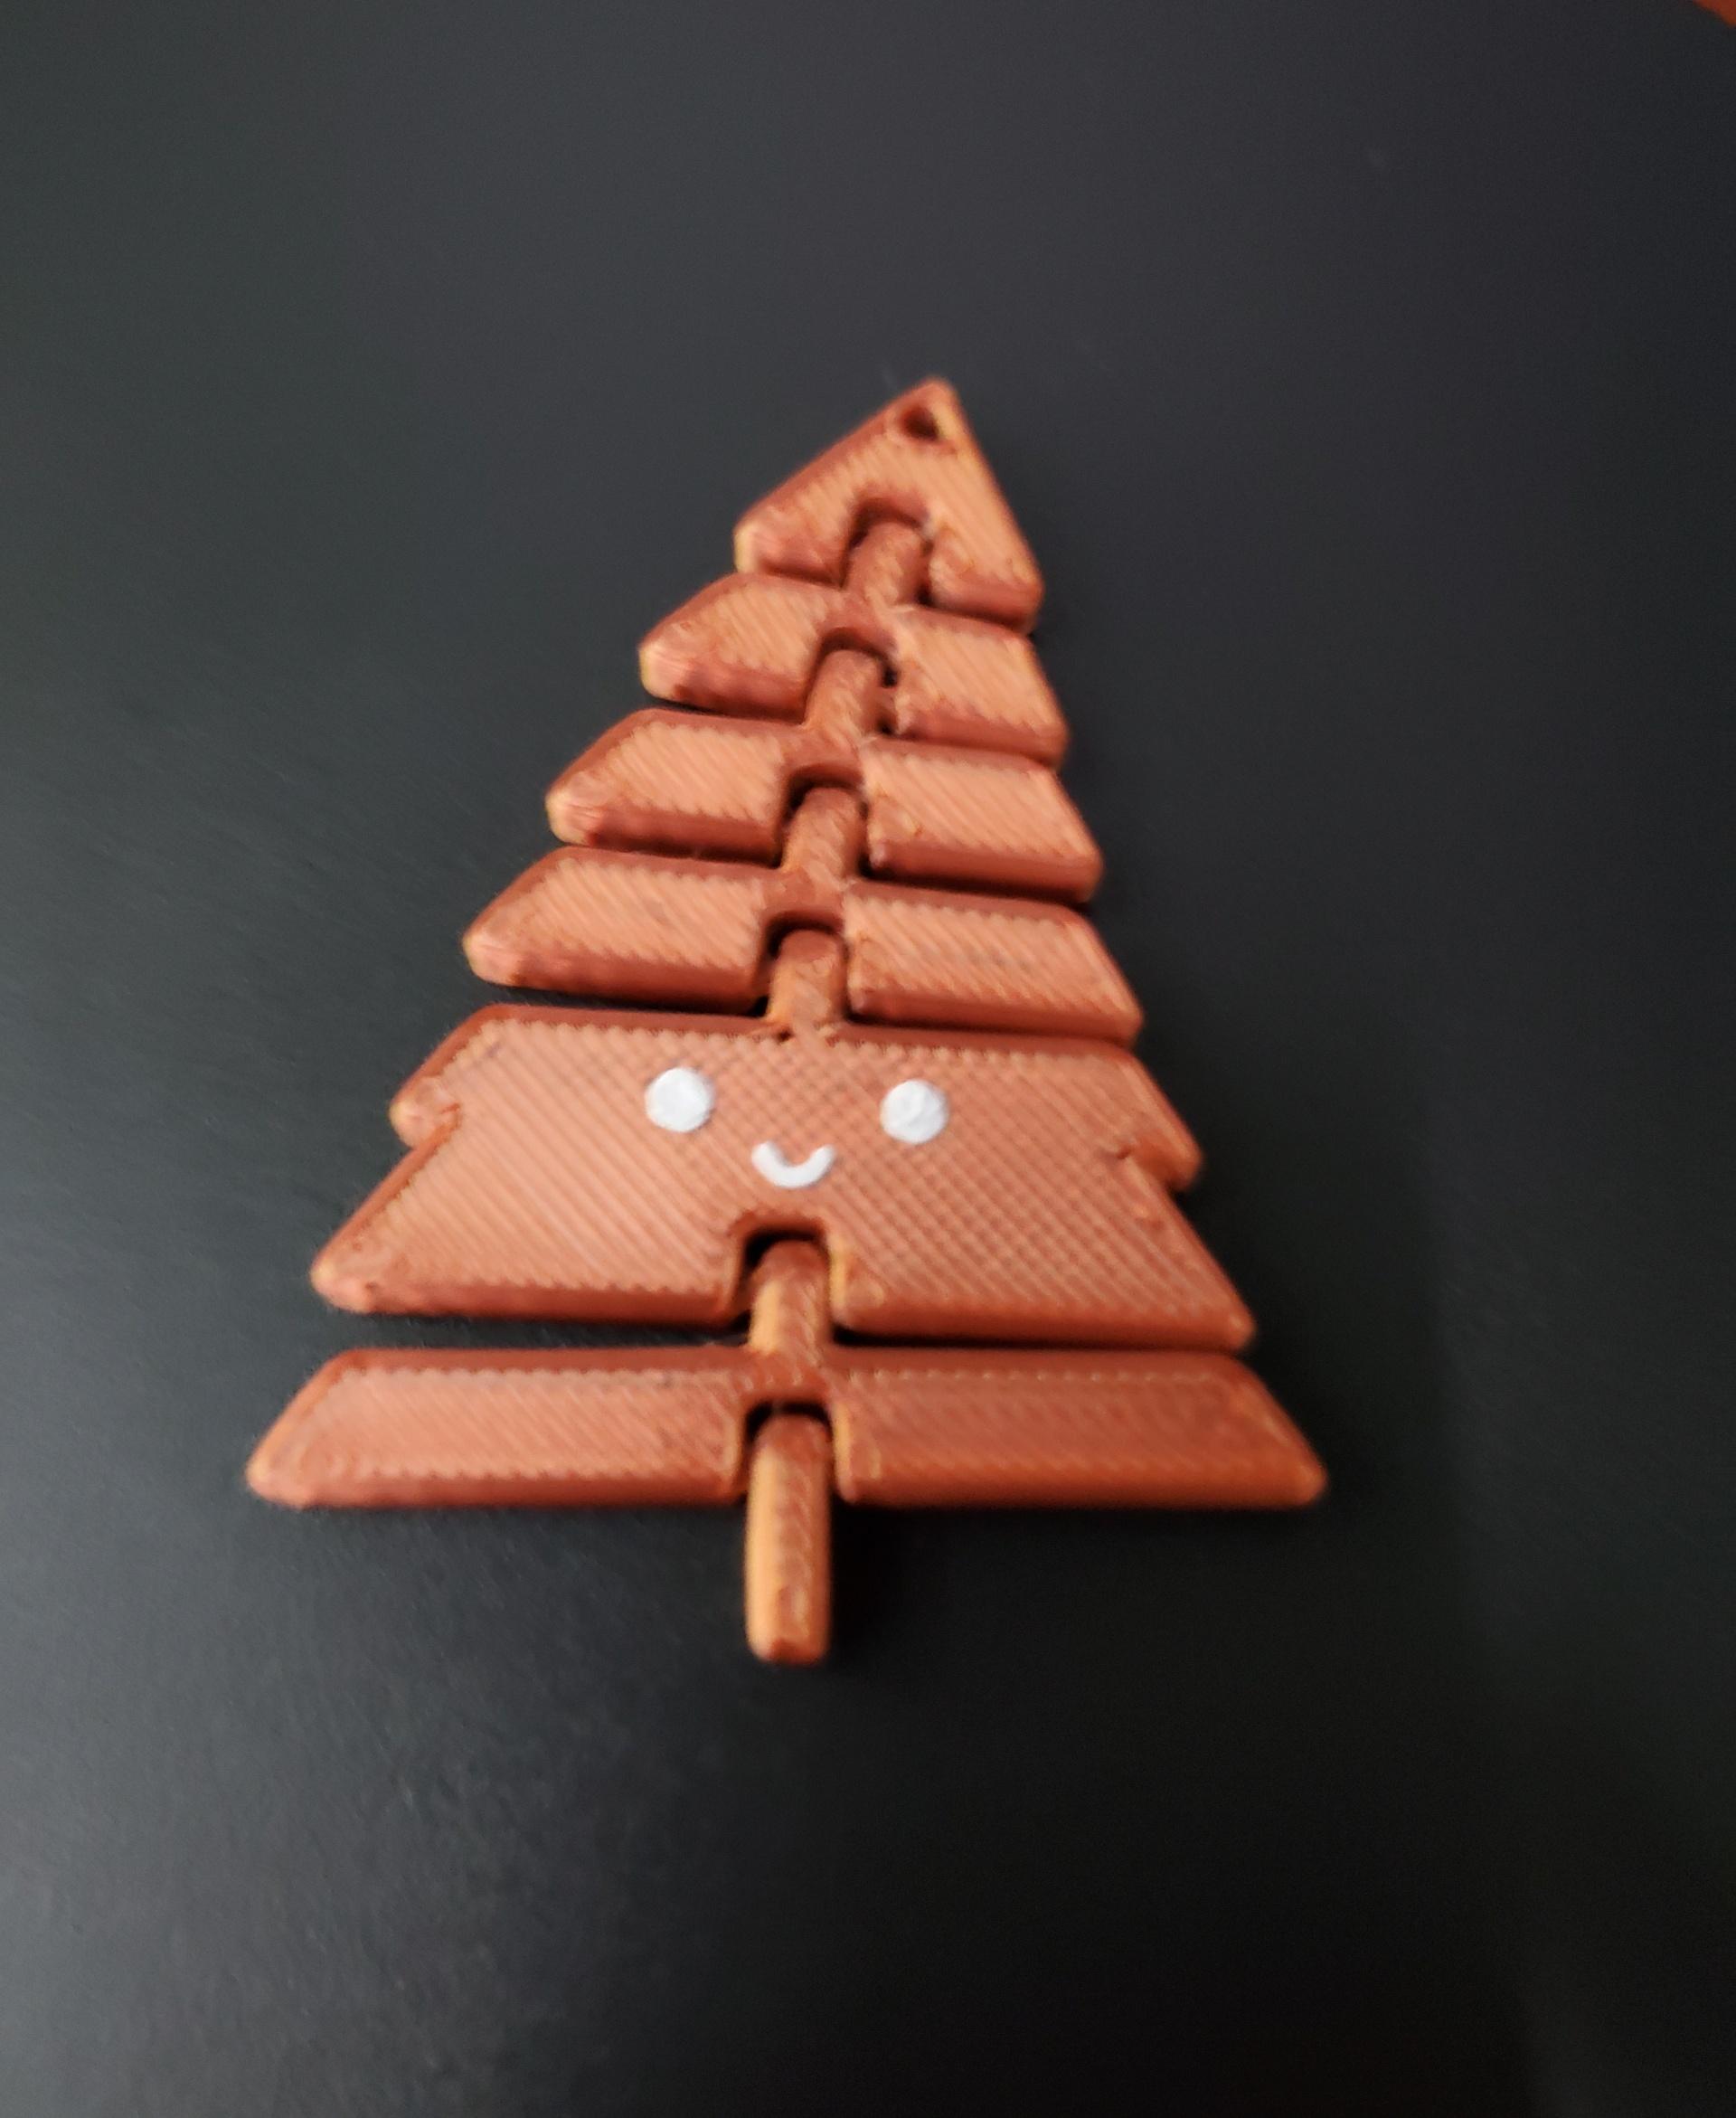 Articulated Kawaii Christmas Tree Keychain - Print in place fidget toy - 3mf - Jayo silk copper - 3d model